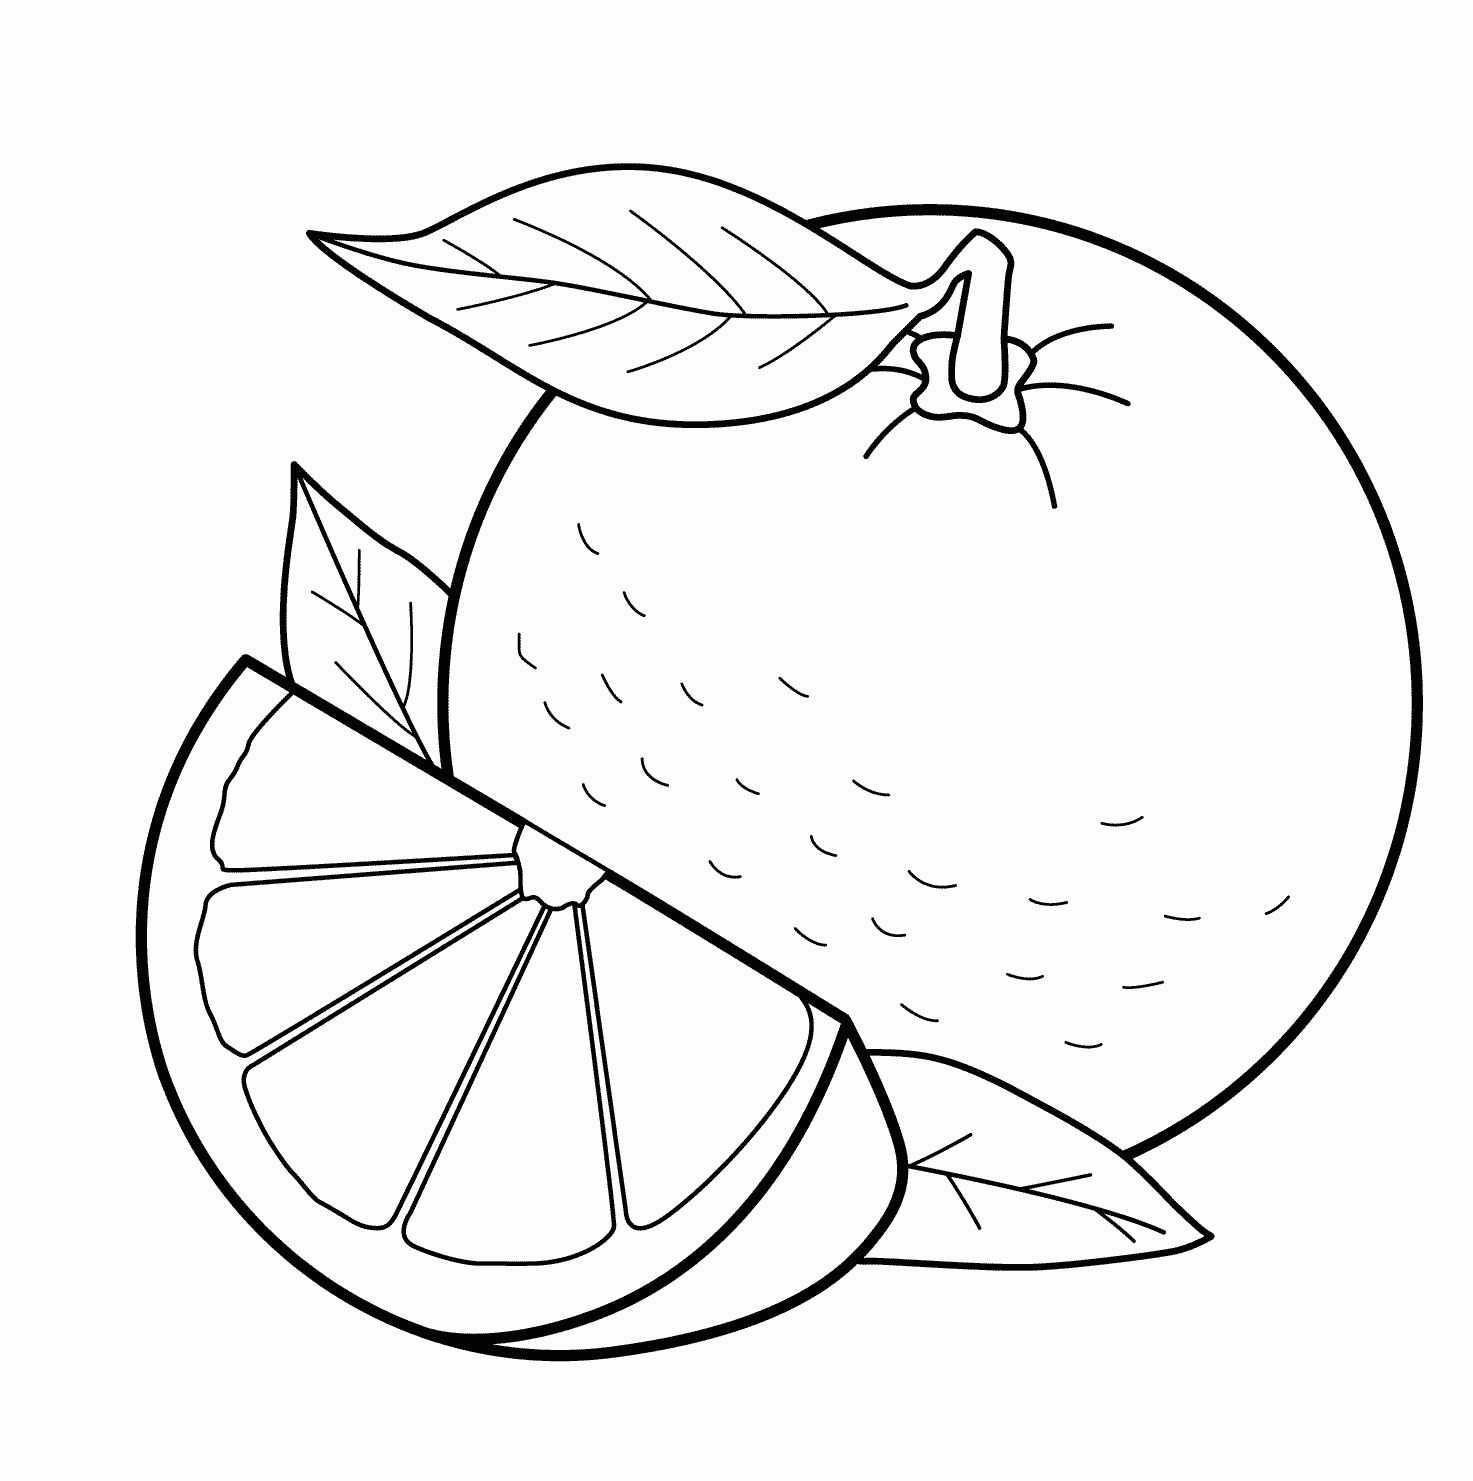 coloring book fruits fruit coloring pages 3 coloring pages to print coloring fruits book 